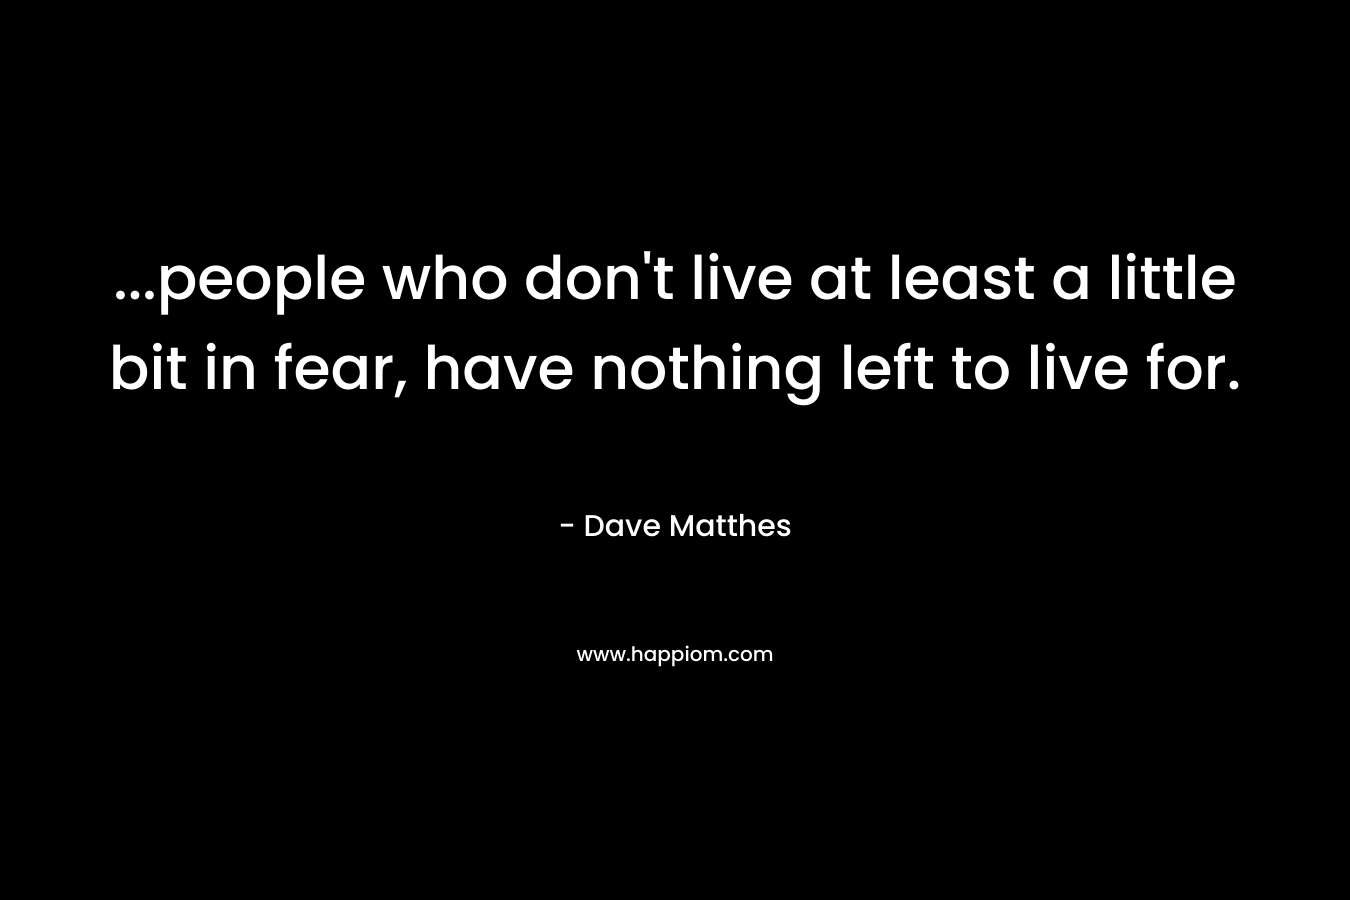 ...people who don't live at least a little bit in fear, have nothing left to live for.